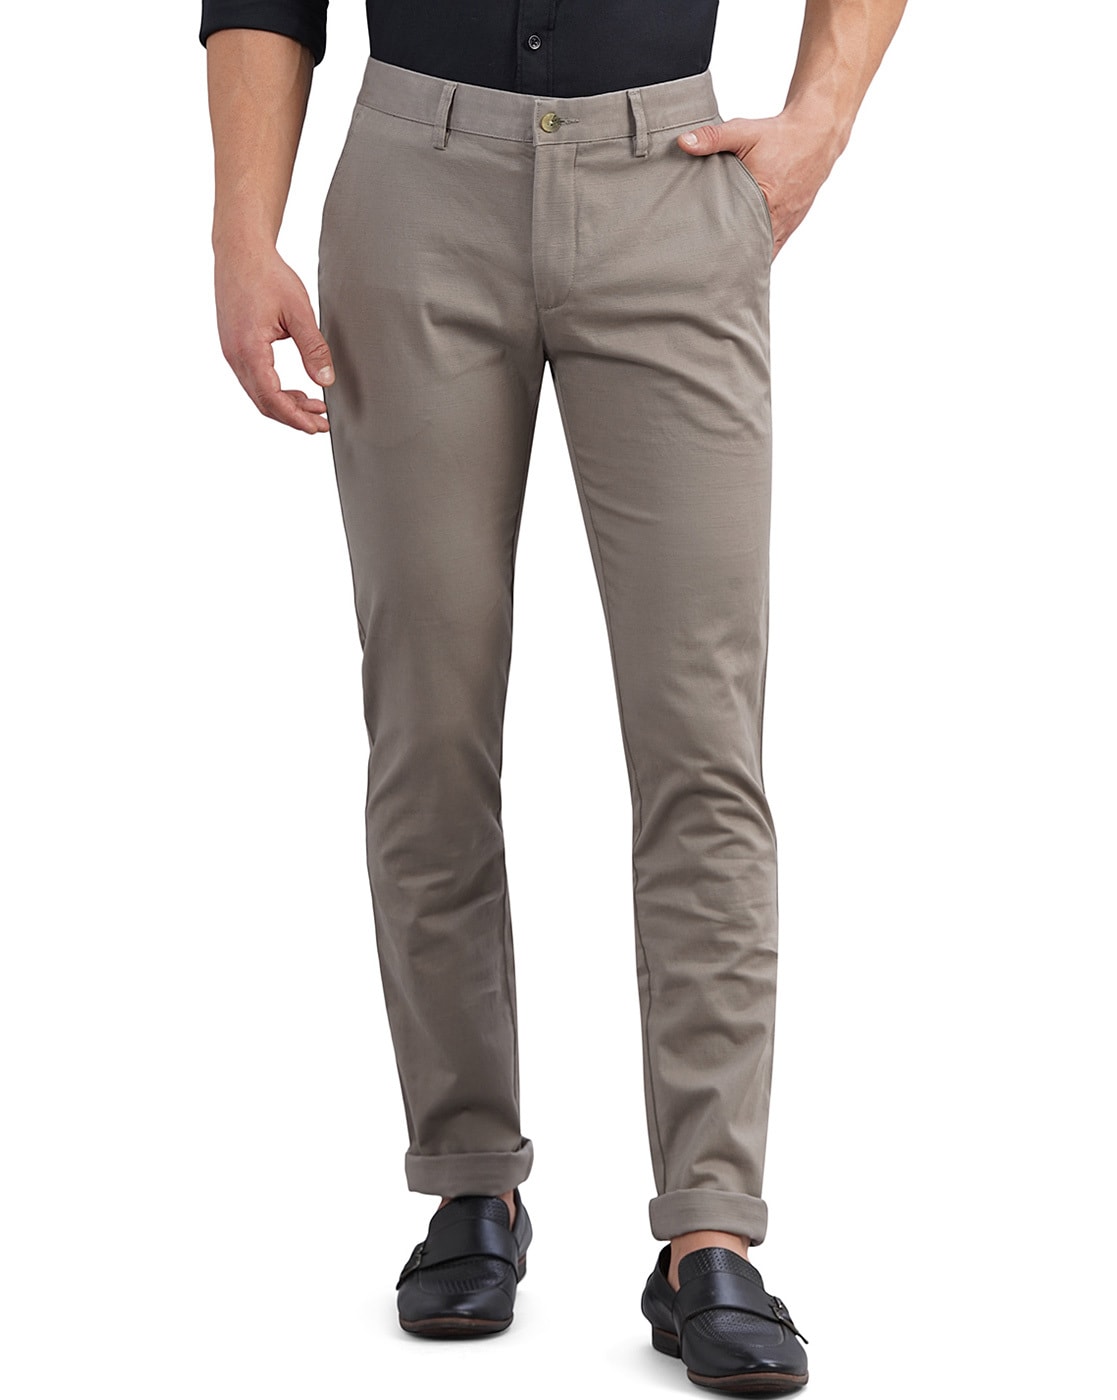 GreenFibre Khaki Slim Fit Trousers  Buy GreenFibre Khaki Slim Fit  Trousers Online at Low Price in India  Snapdeal